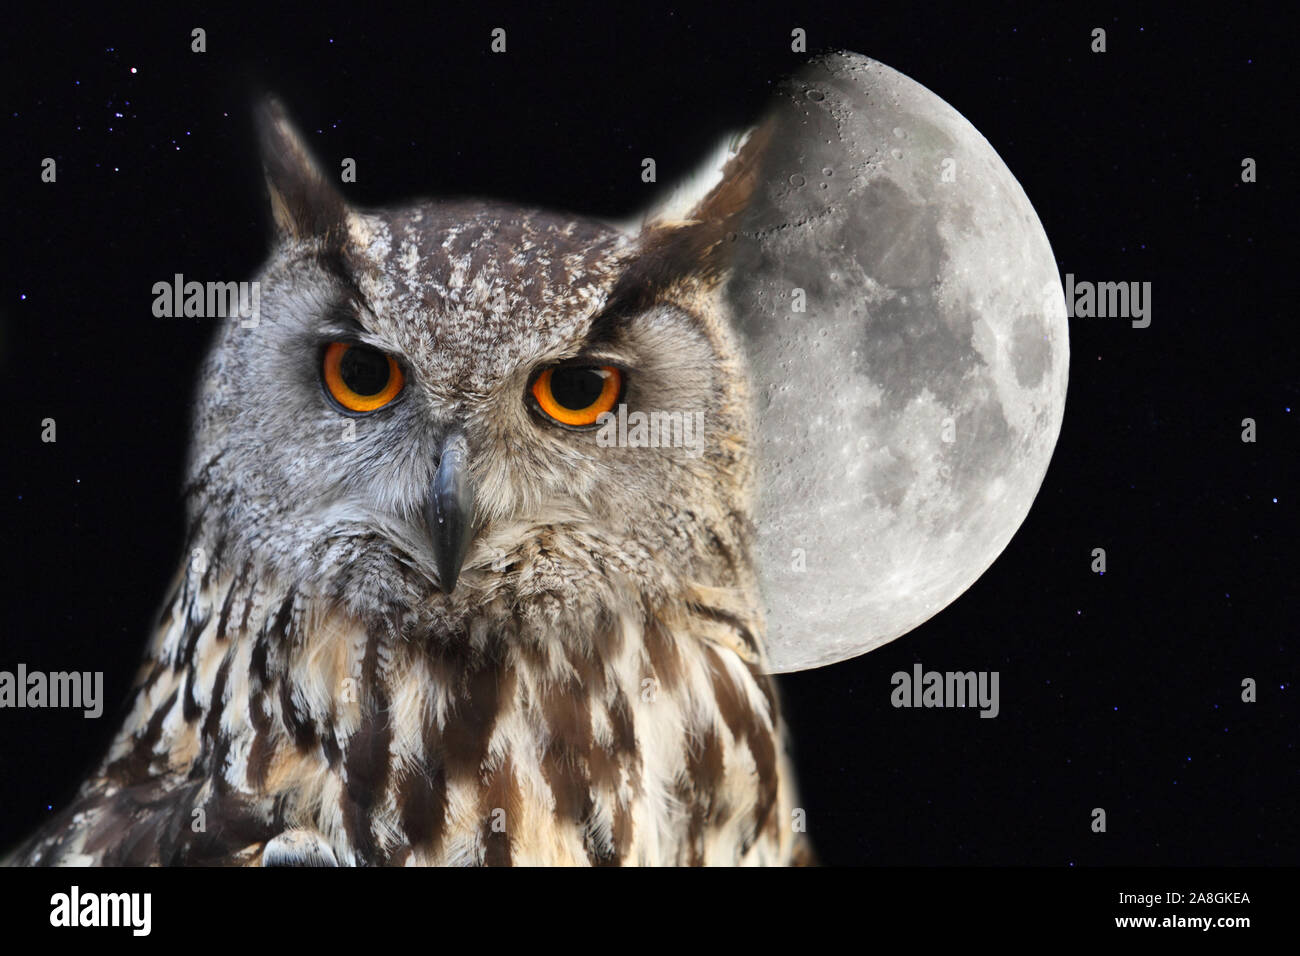 eagle owl with background the moon in the night sky Stock Photo